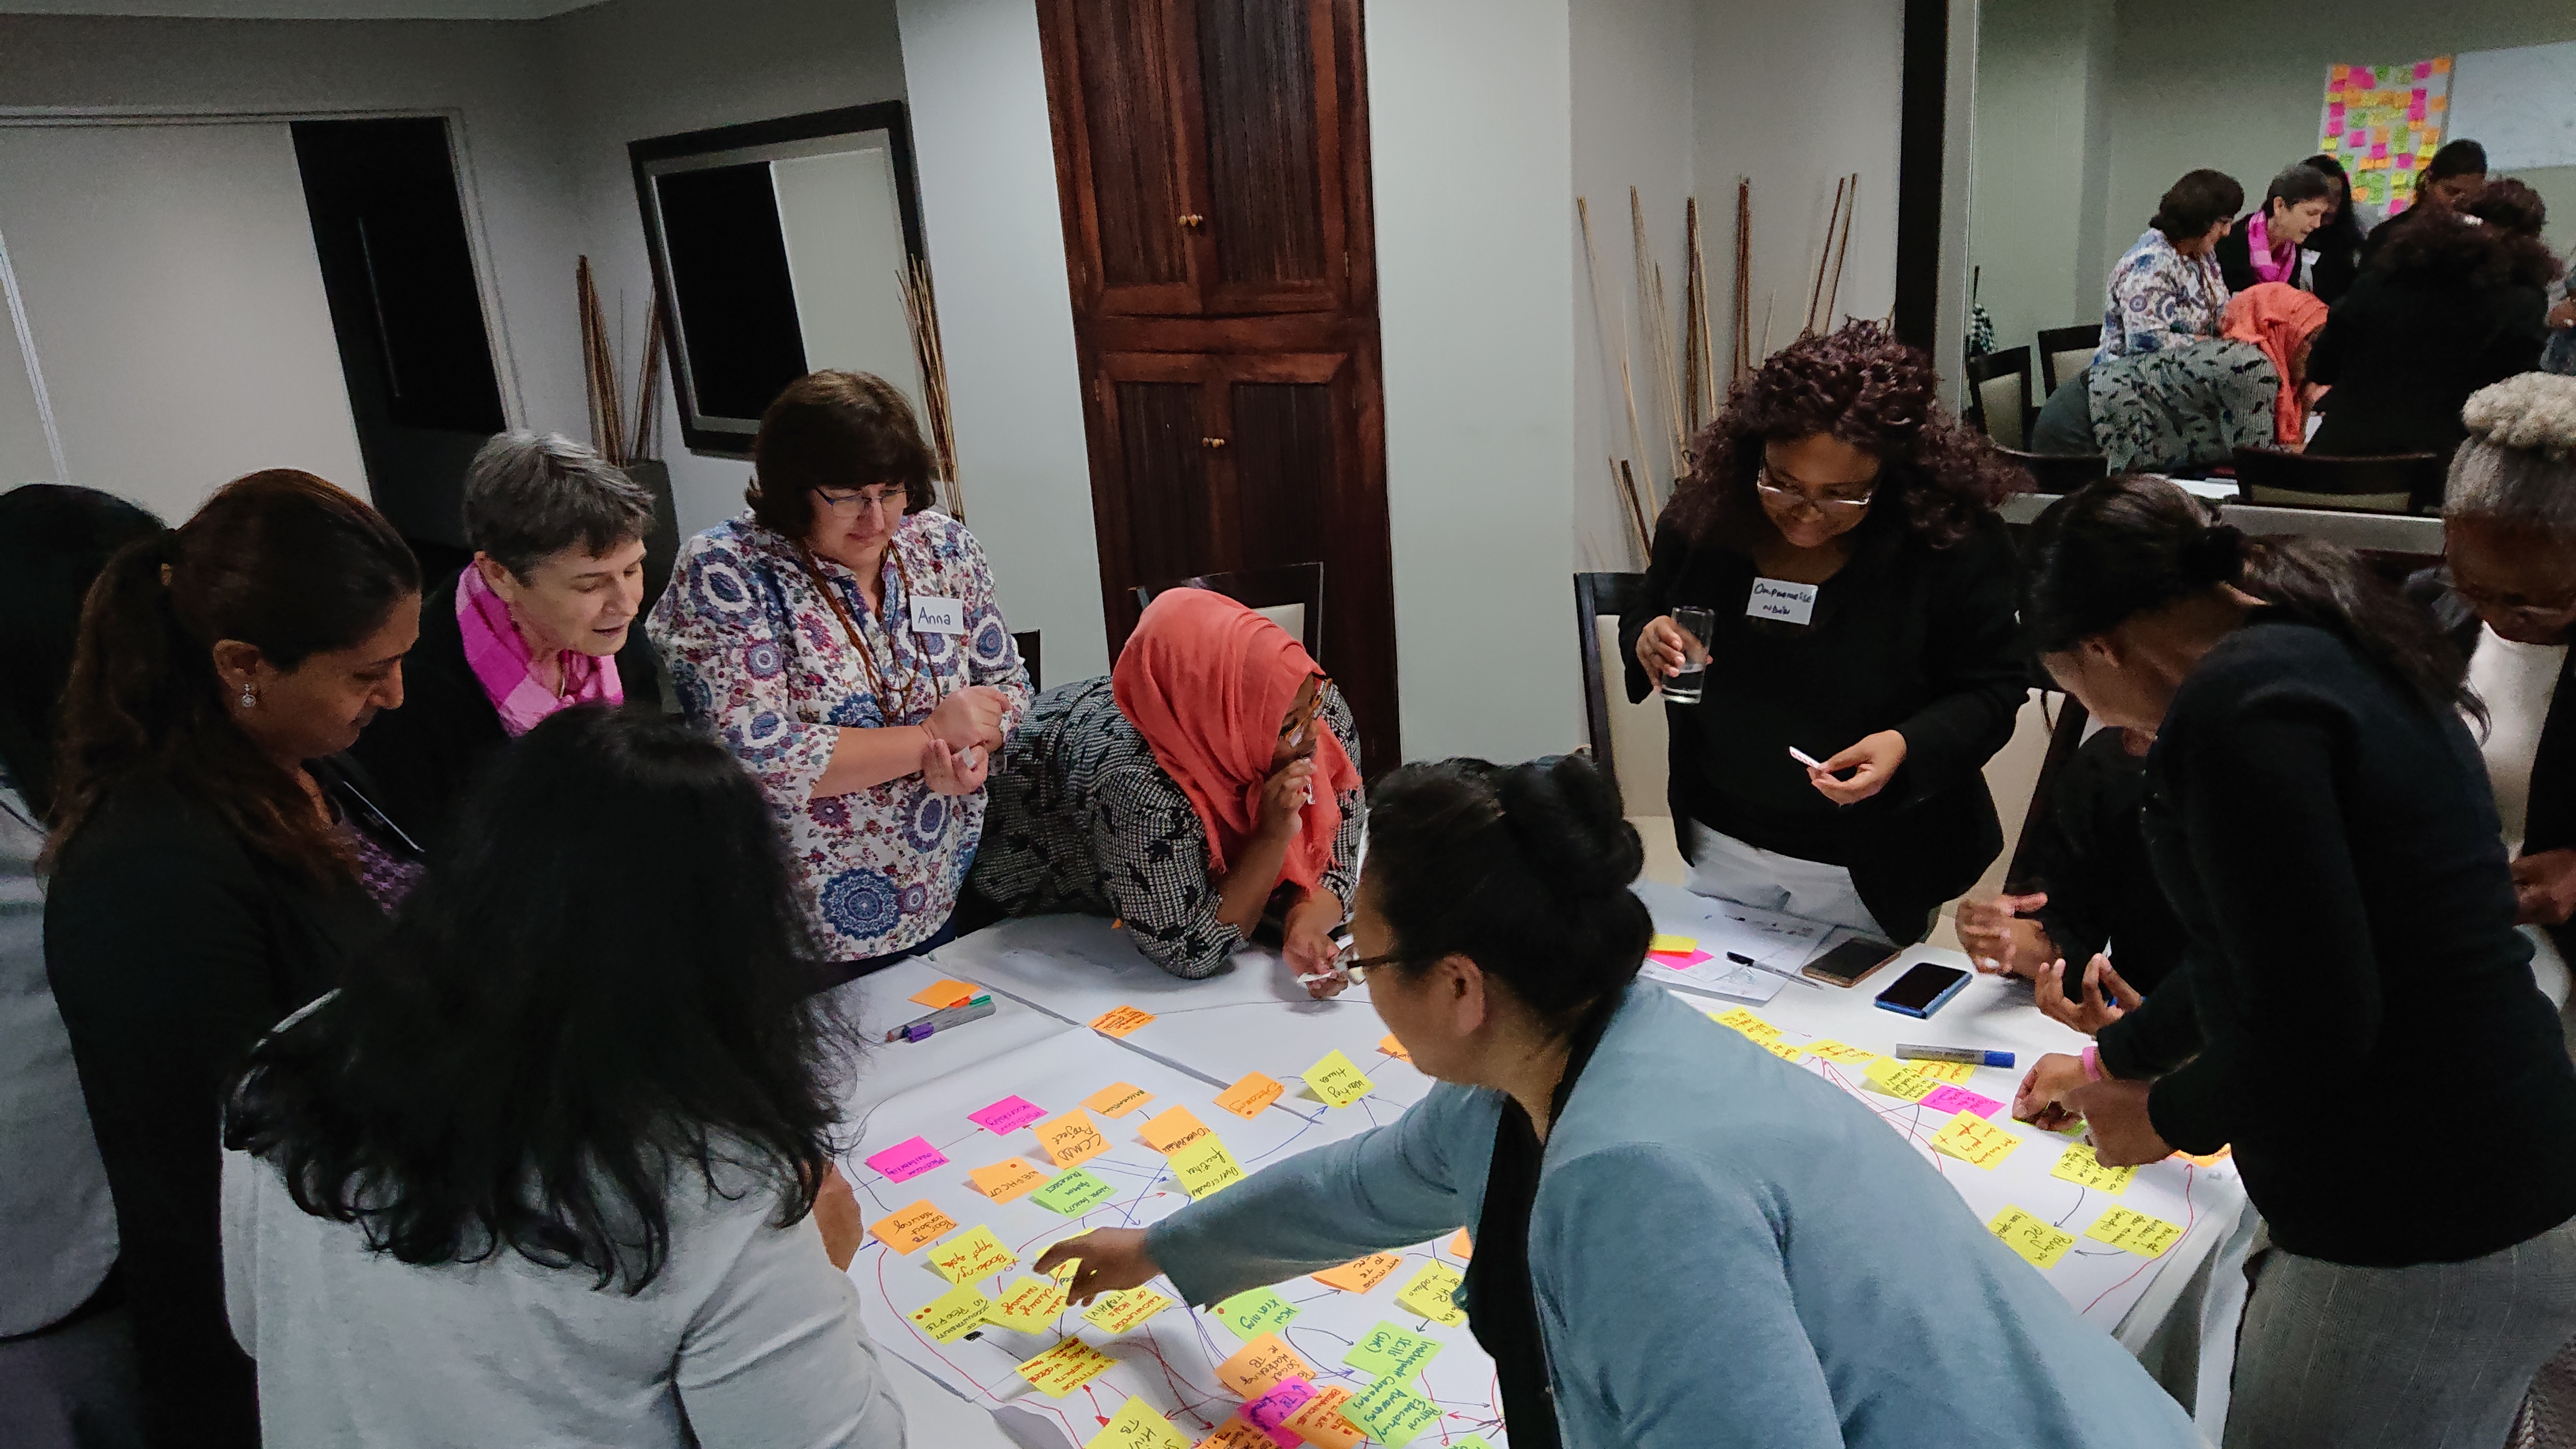 group of people standing around table putting post-it notes on chartboard paper